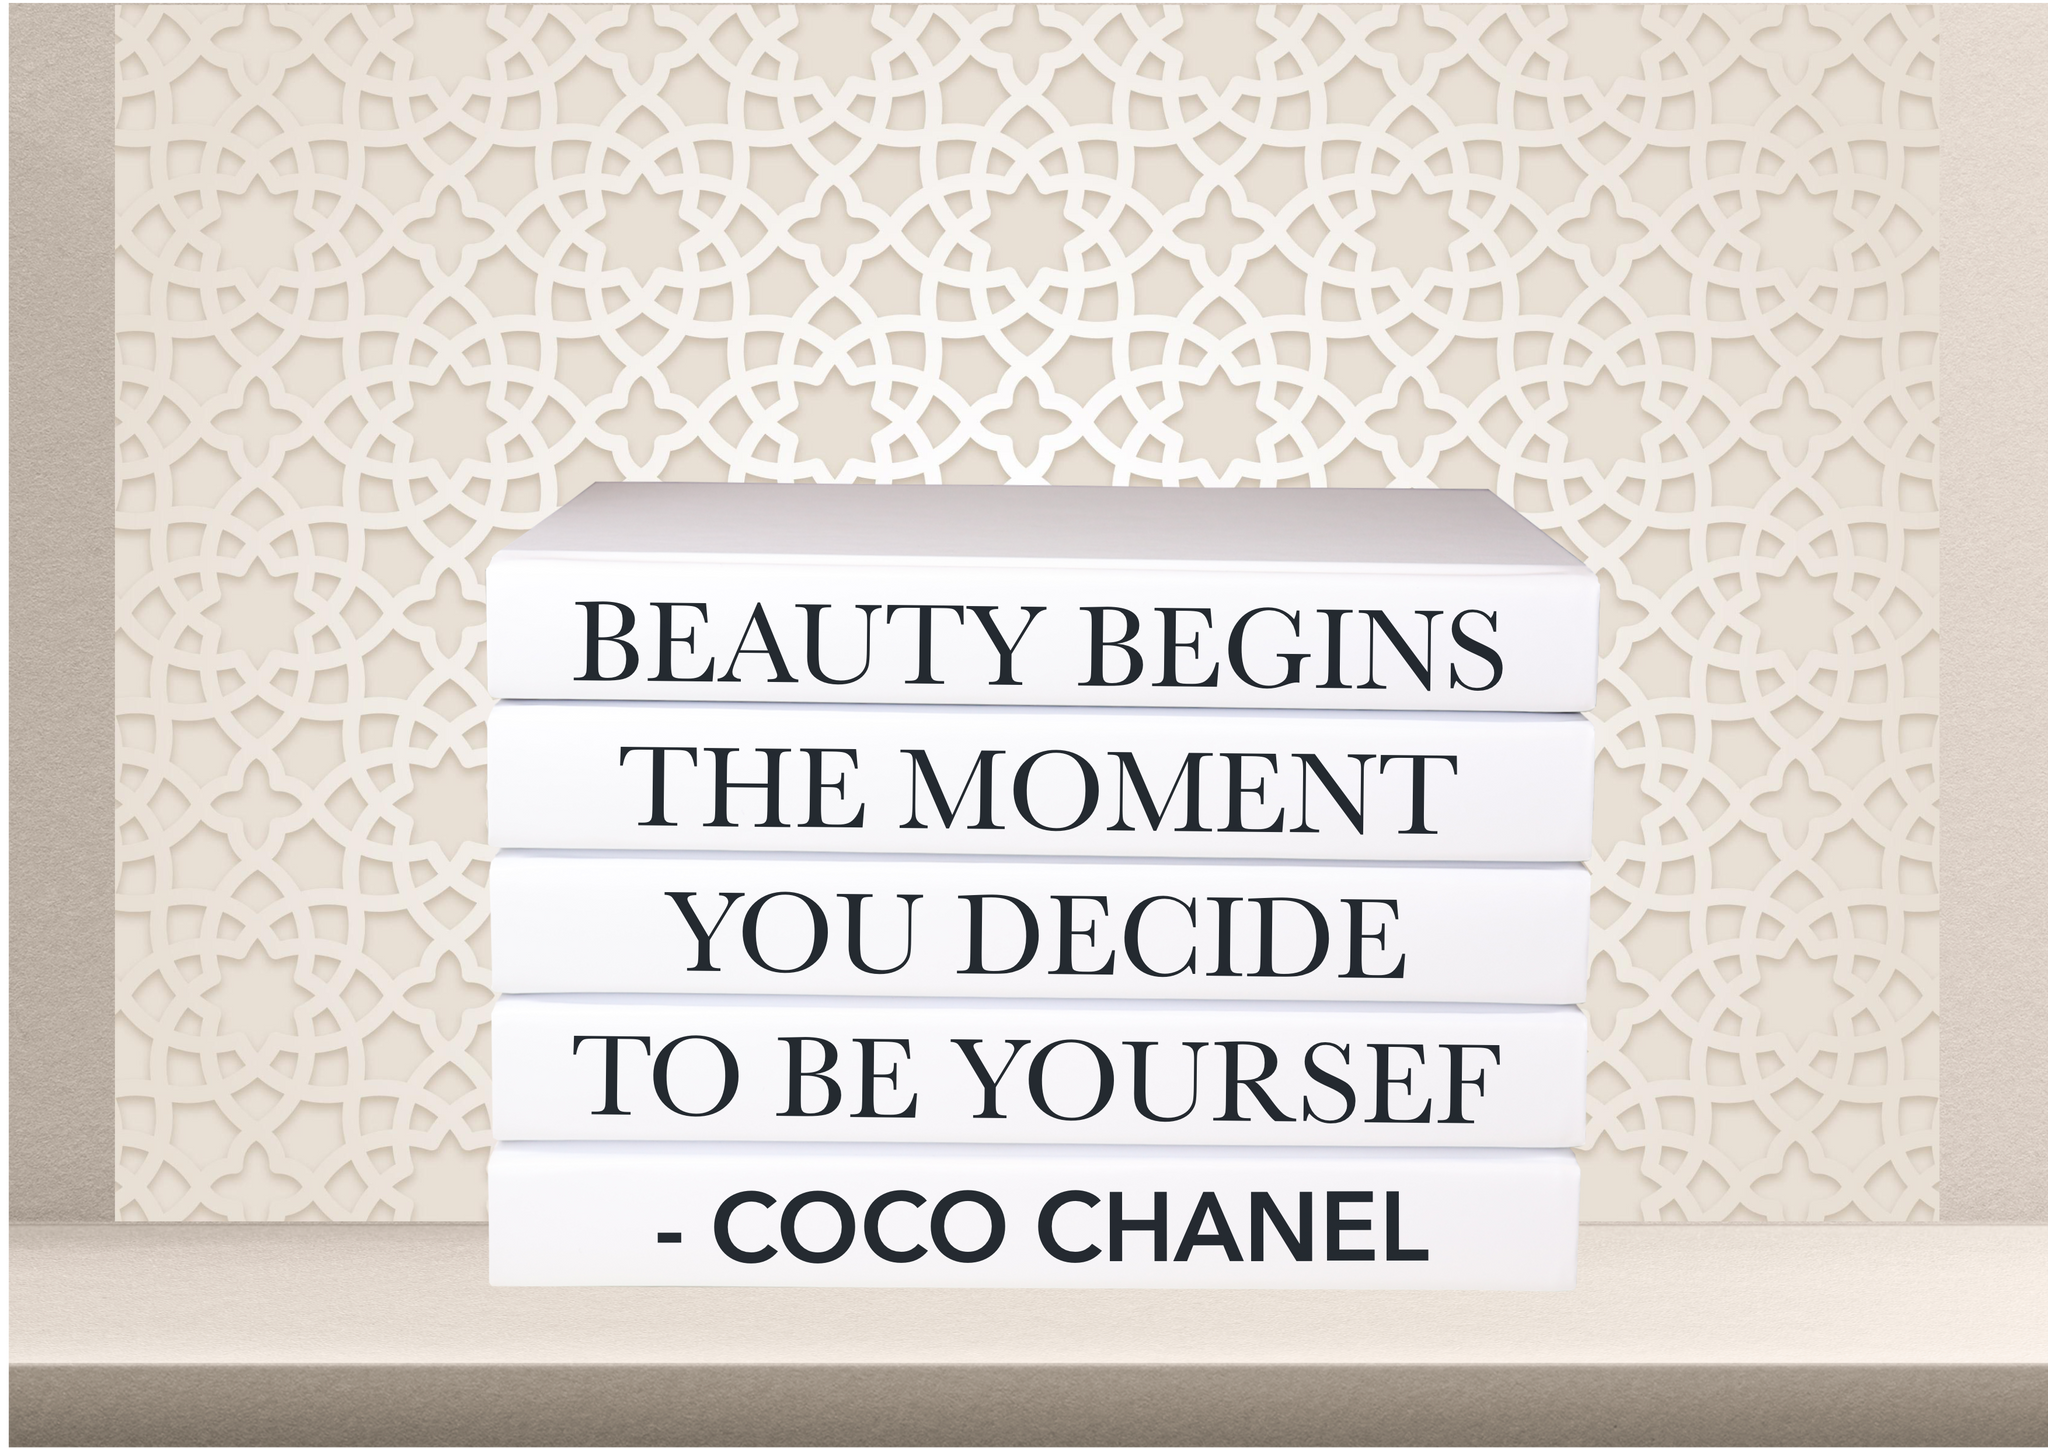 coco chanel journal